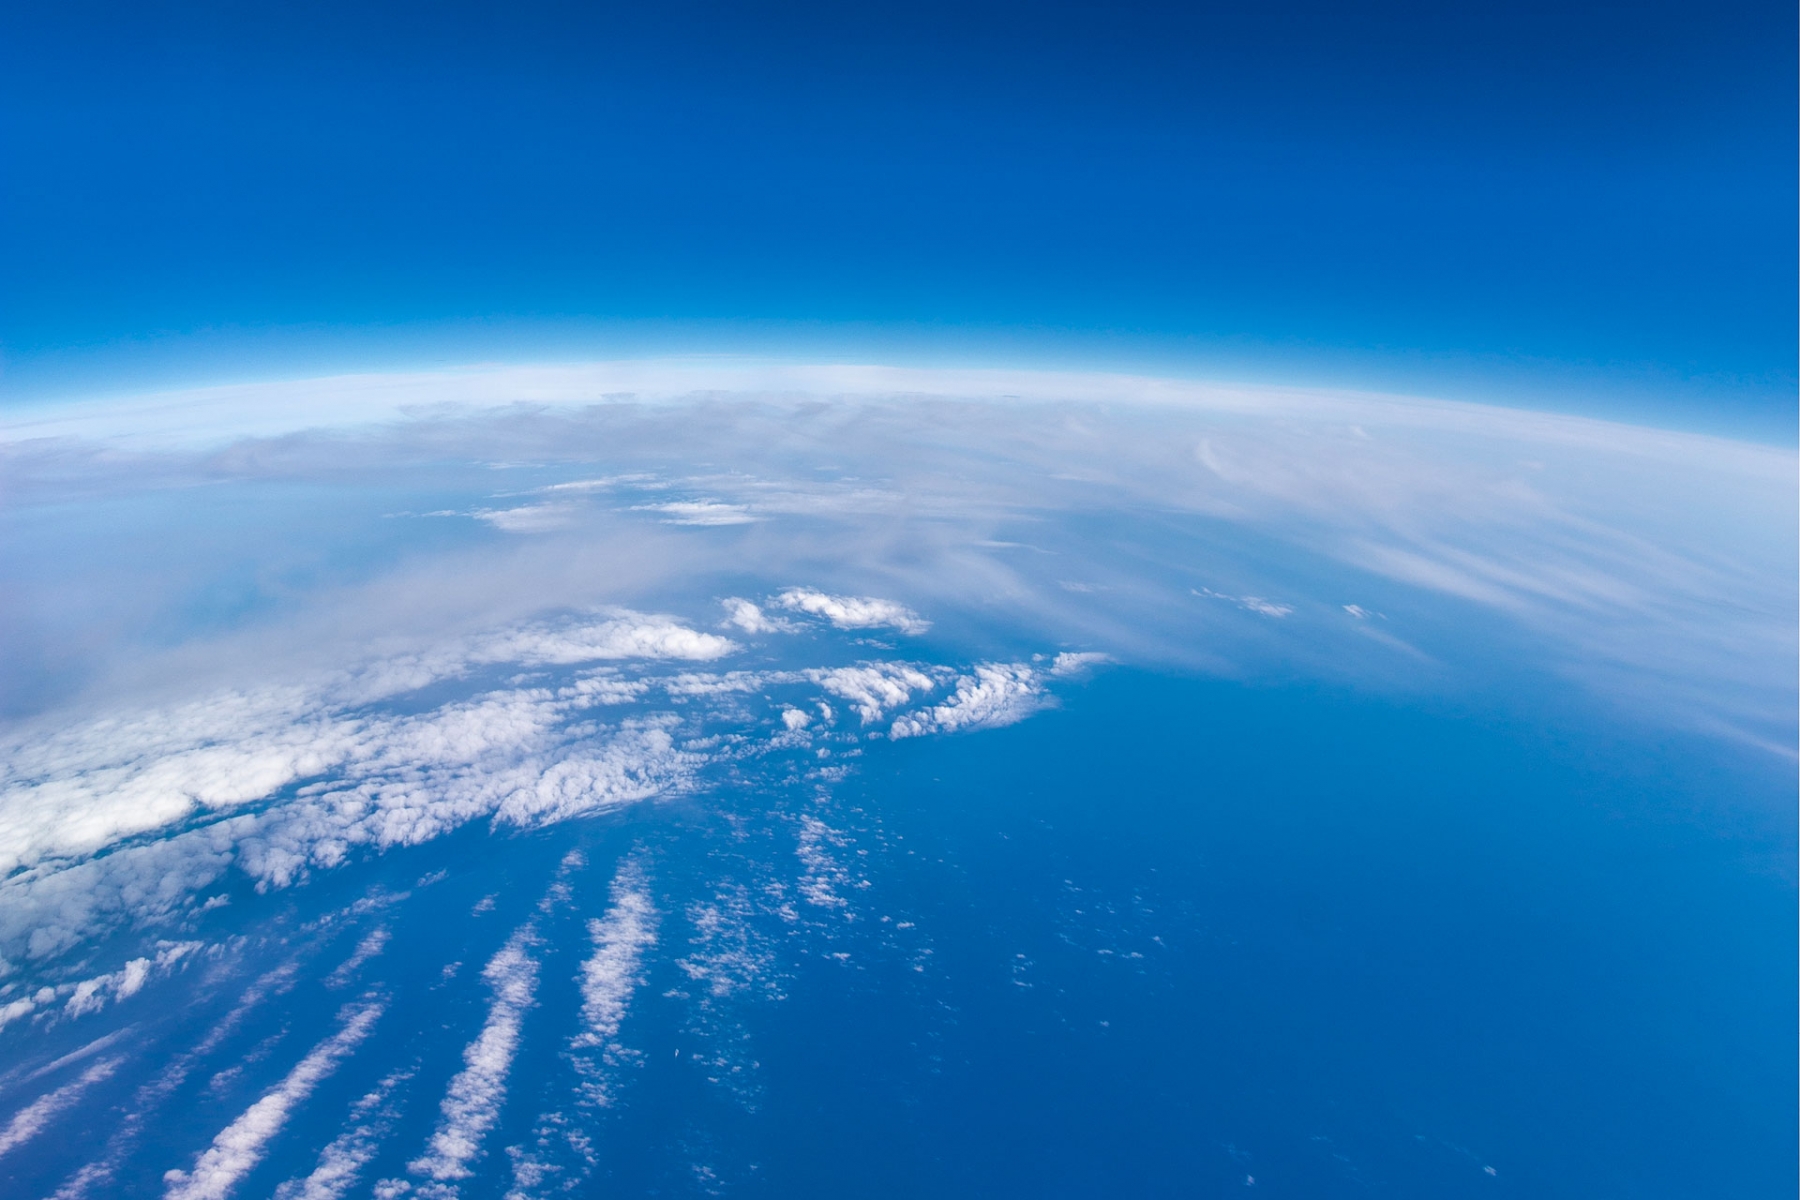 View of Earth's atmosphere from space - Image credit: AXA